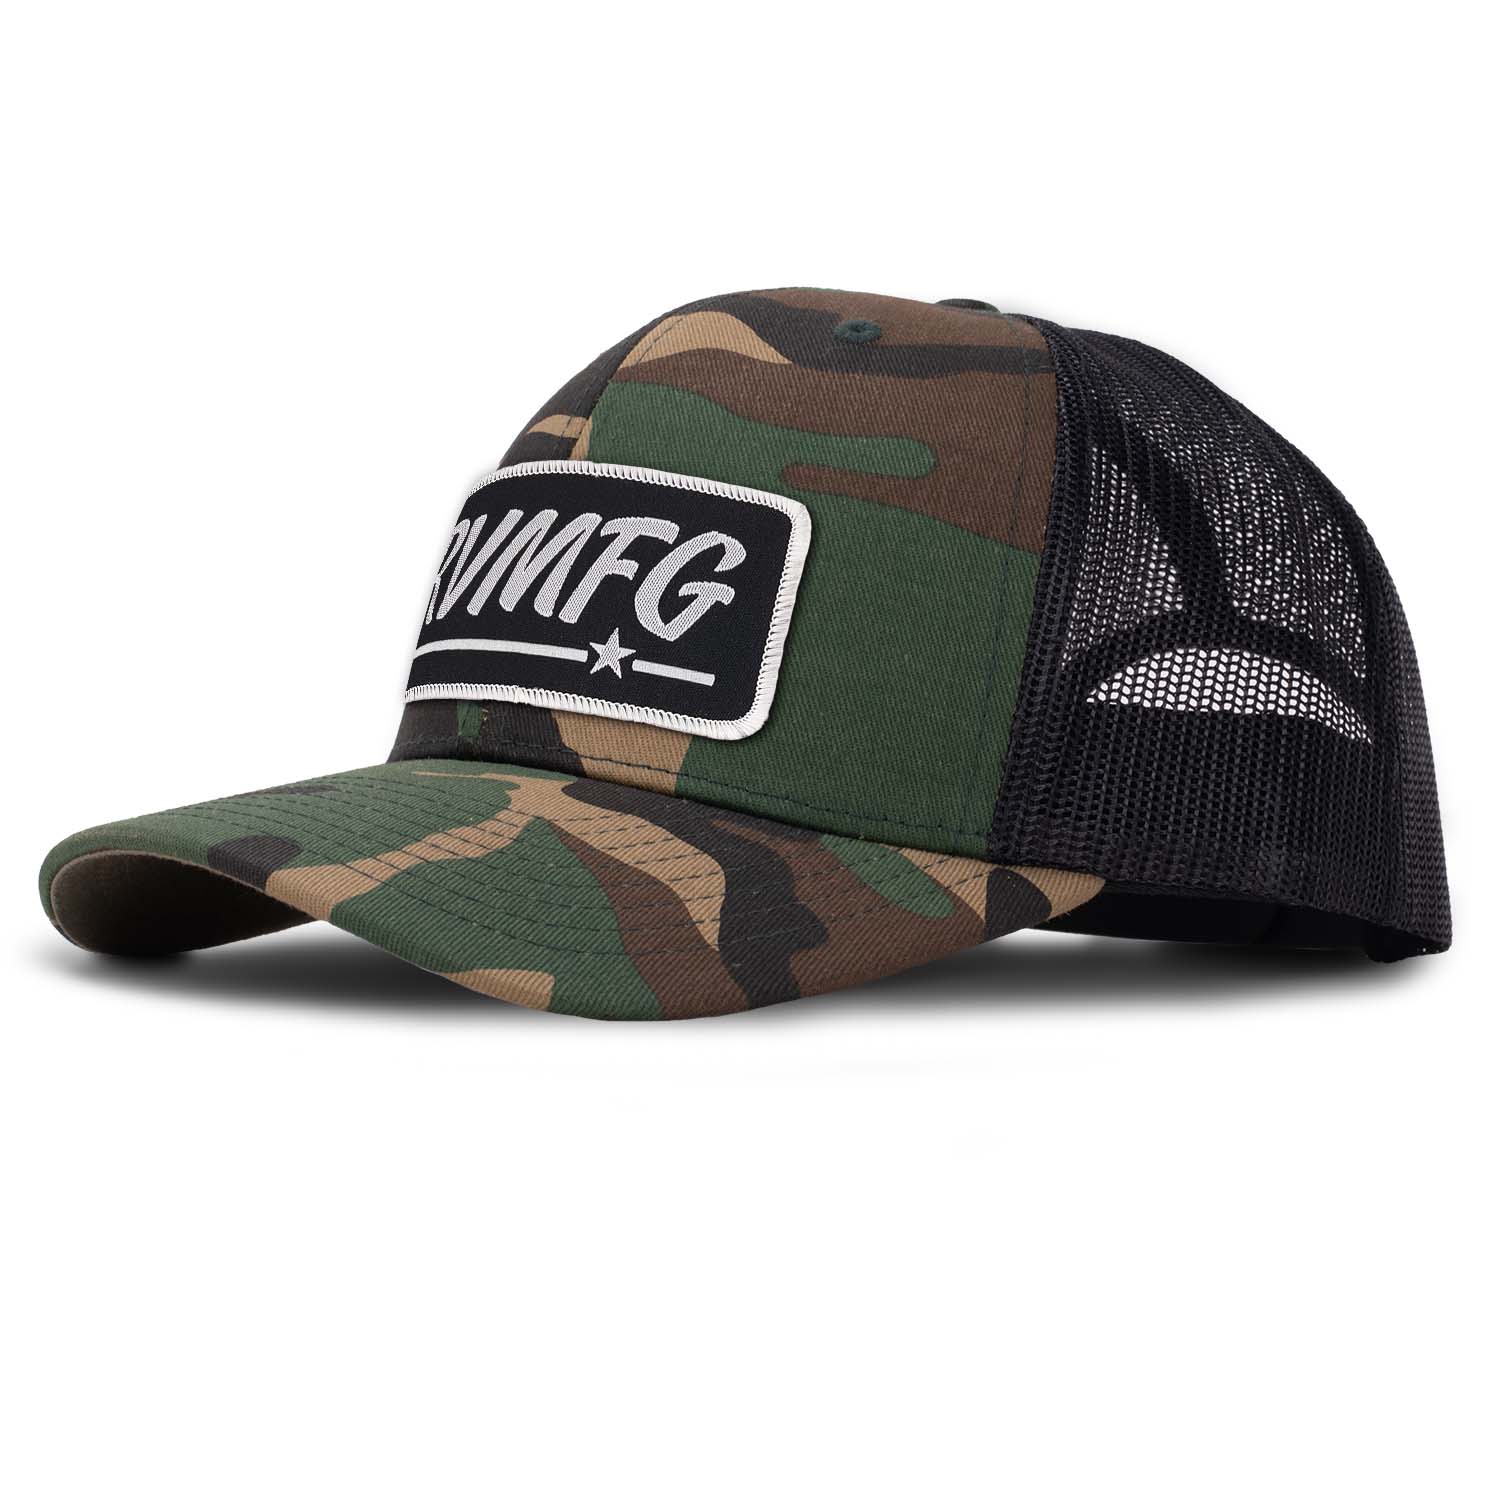 Revolution Mfg classic trucker hat in woodland camo with black mesh with a black woven RVMFG patch with white letters and a white border